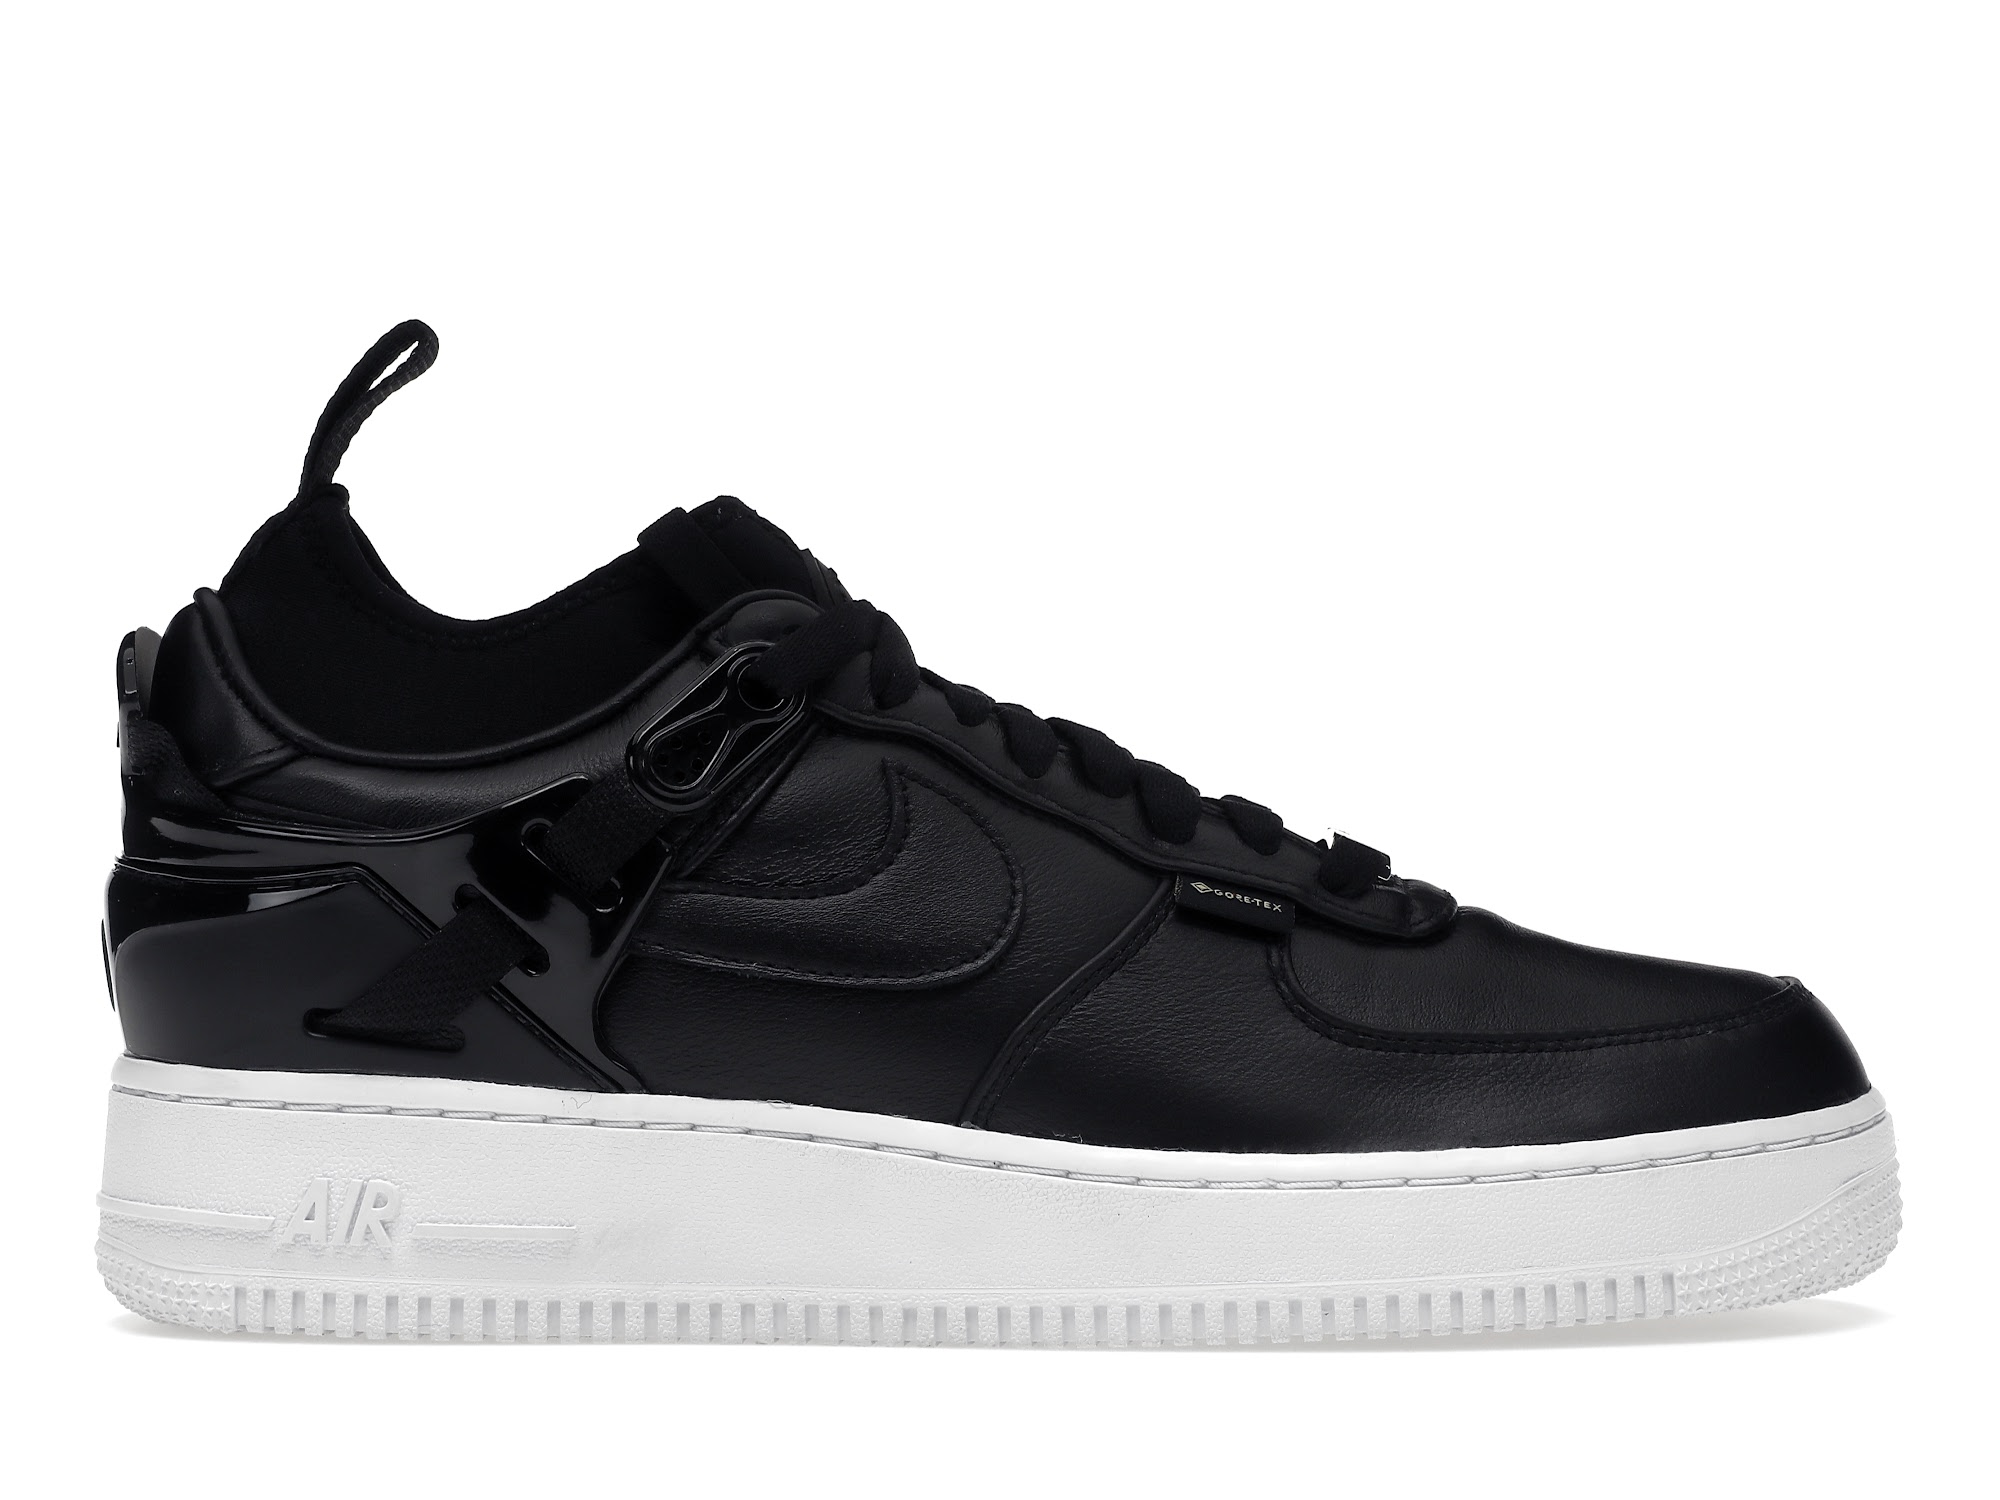 Nike Air Force 1 Low SP Undercover Black Men's - DQ7558-002 - US